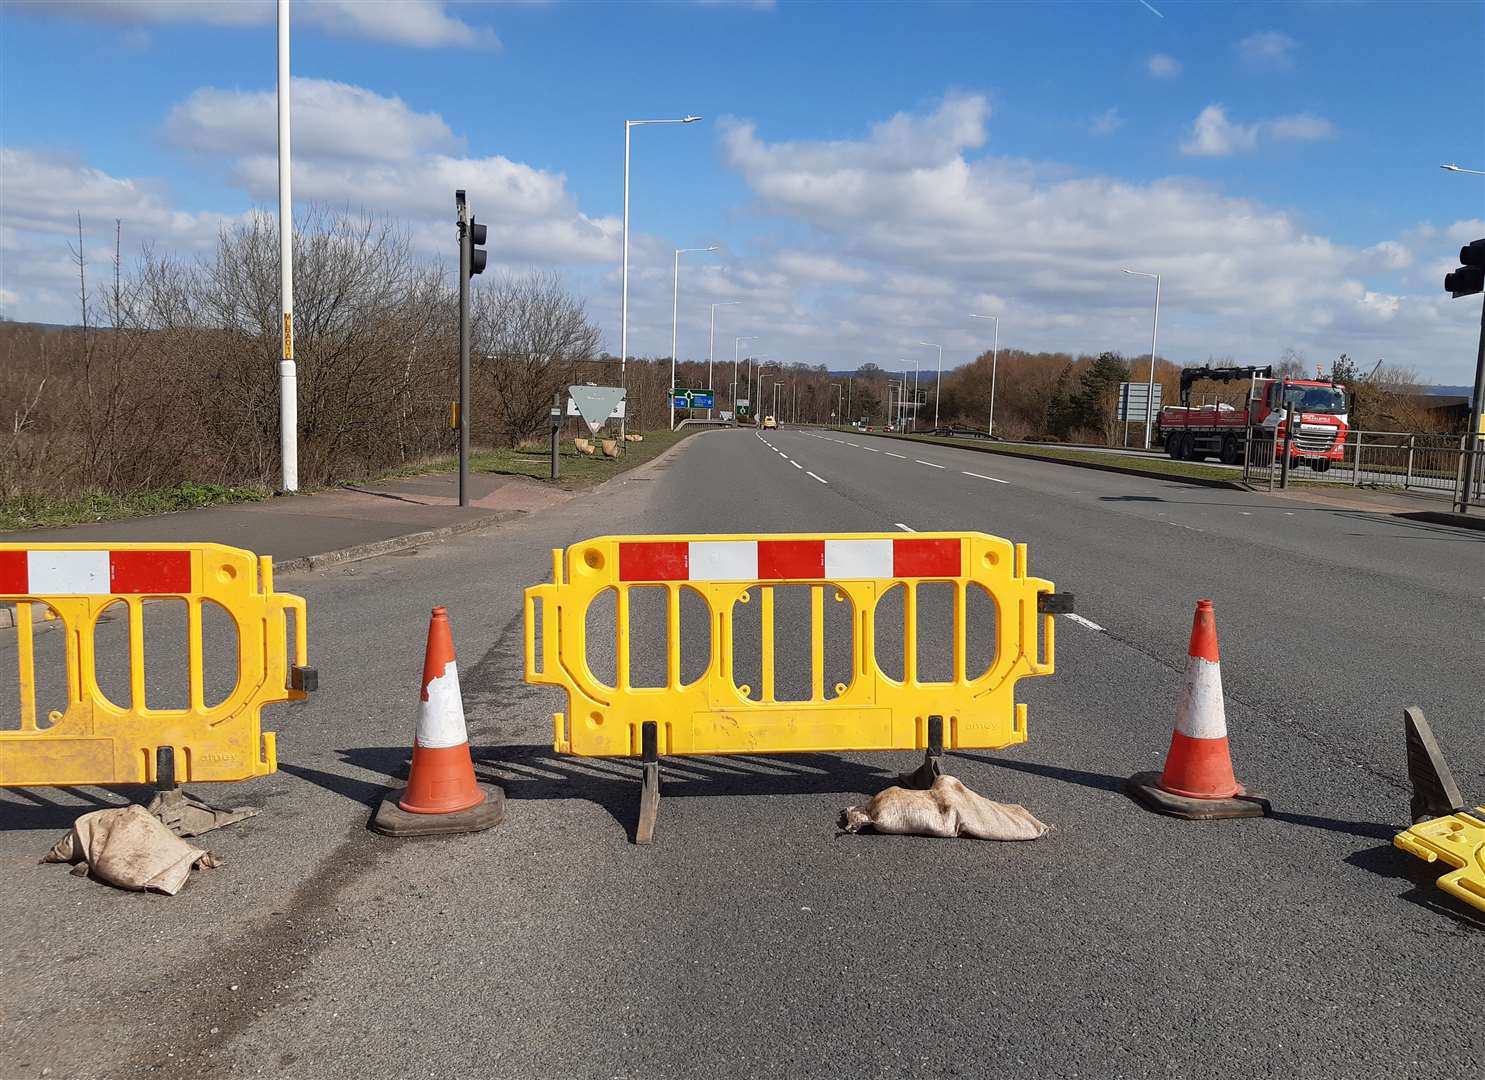 The road between Drovers Roundabout and Junction 9 was closed throughout the morning